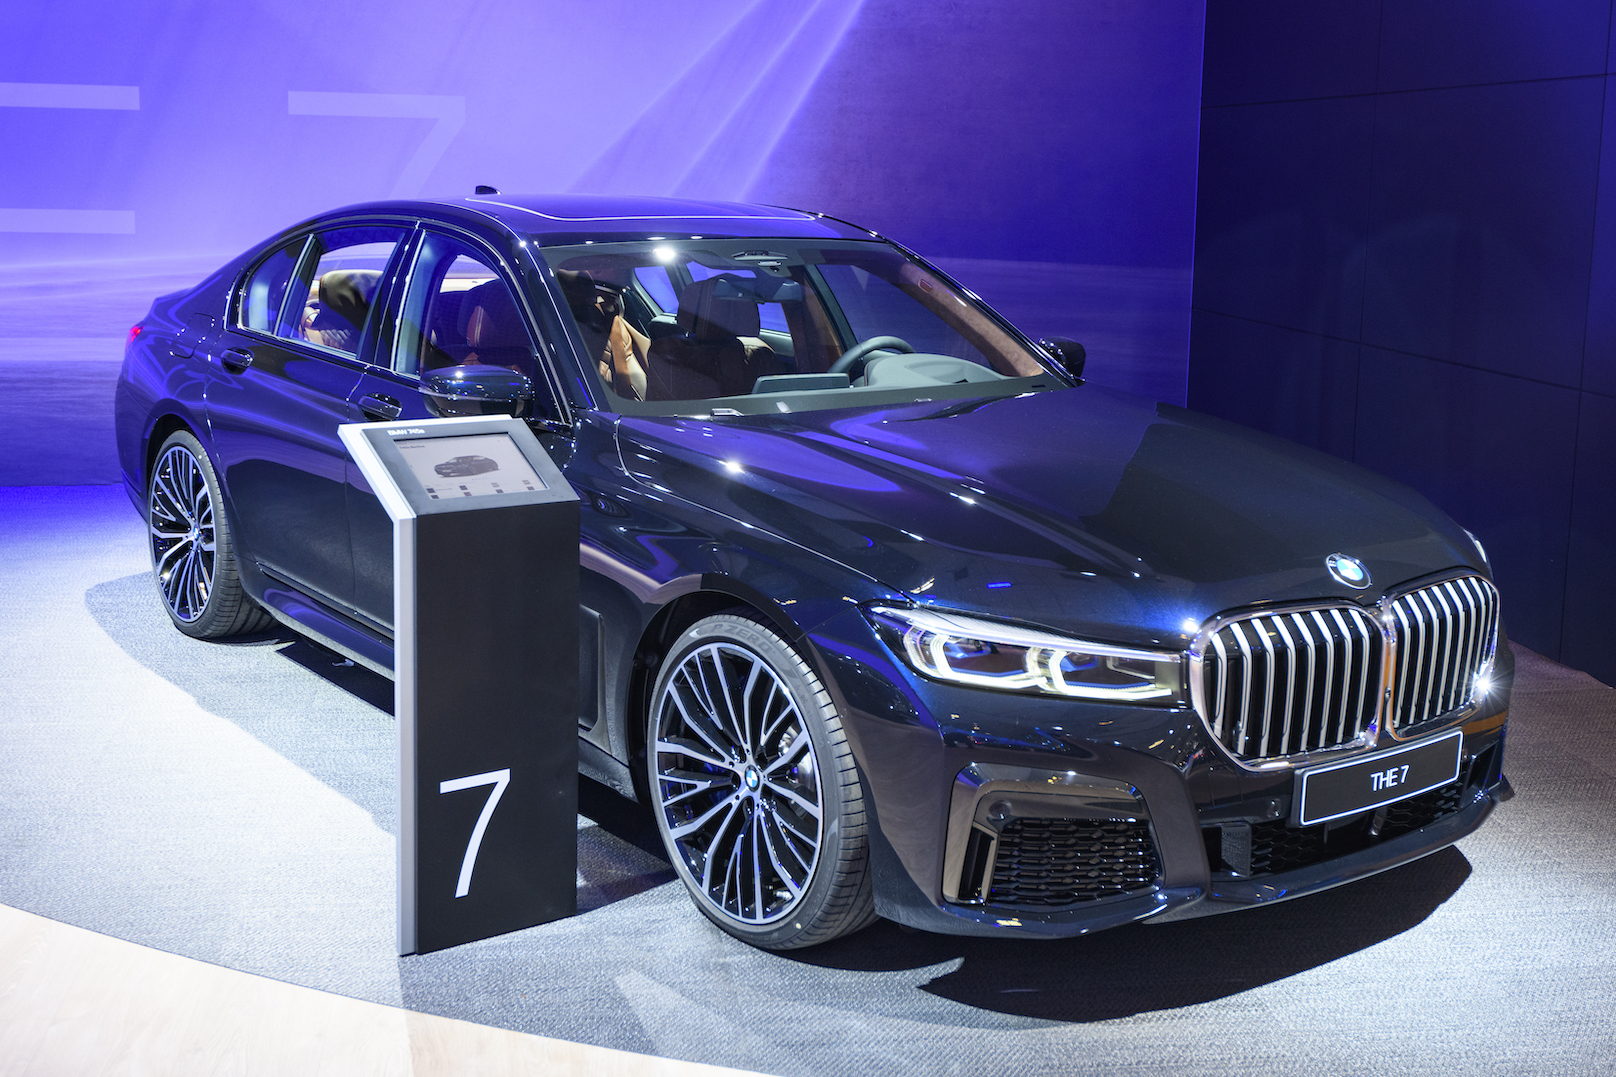 The 2020 BMW 7 Series Finally Overtook Its Biggest Rival